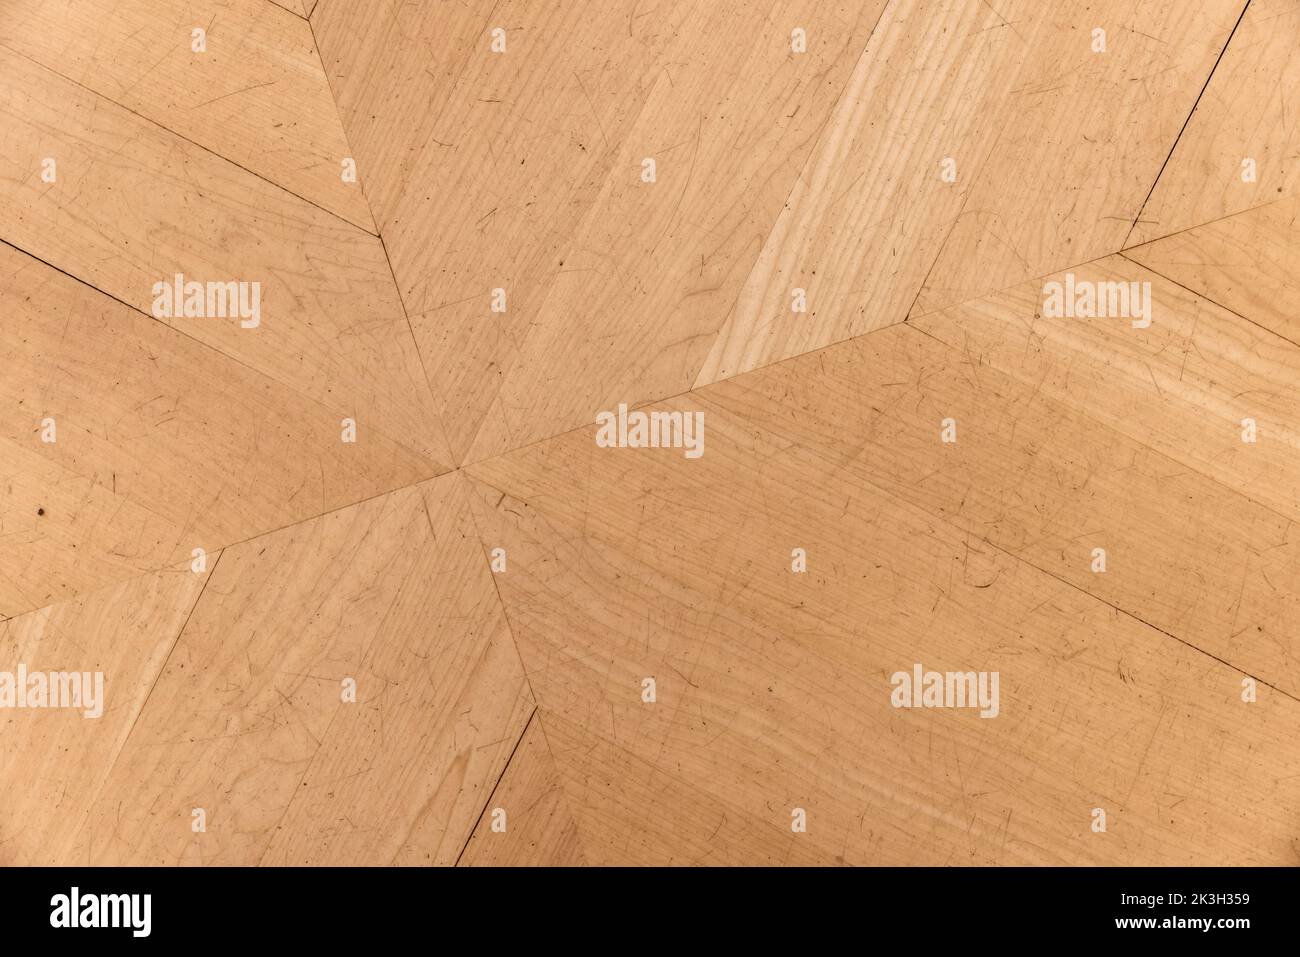 Old parquet made of oak wood planks with geometric pattern, decorative tiling. Background photo texture Stock Photo